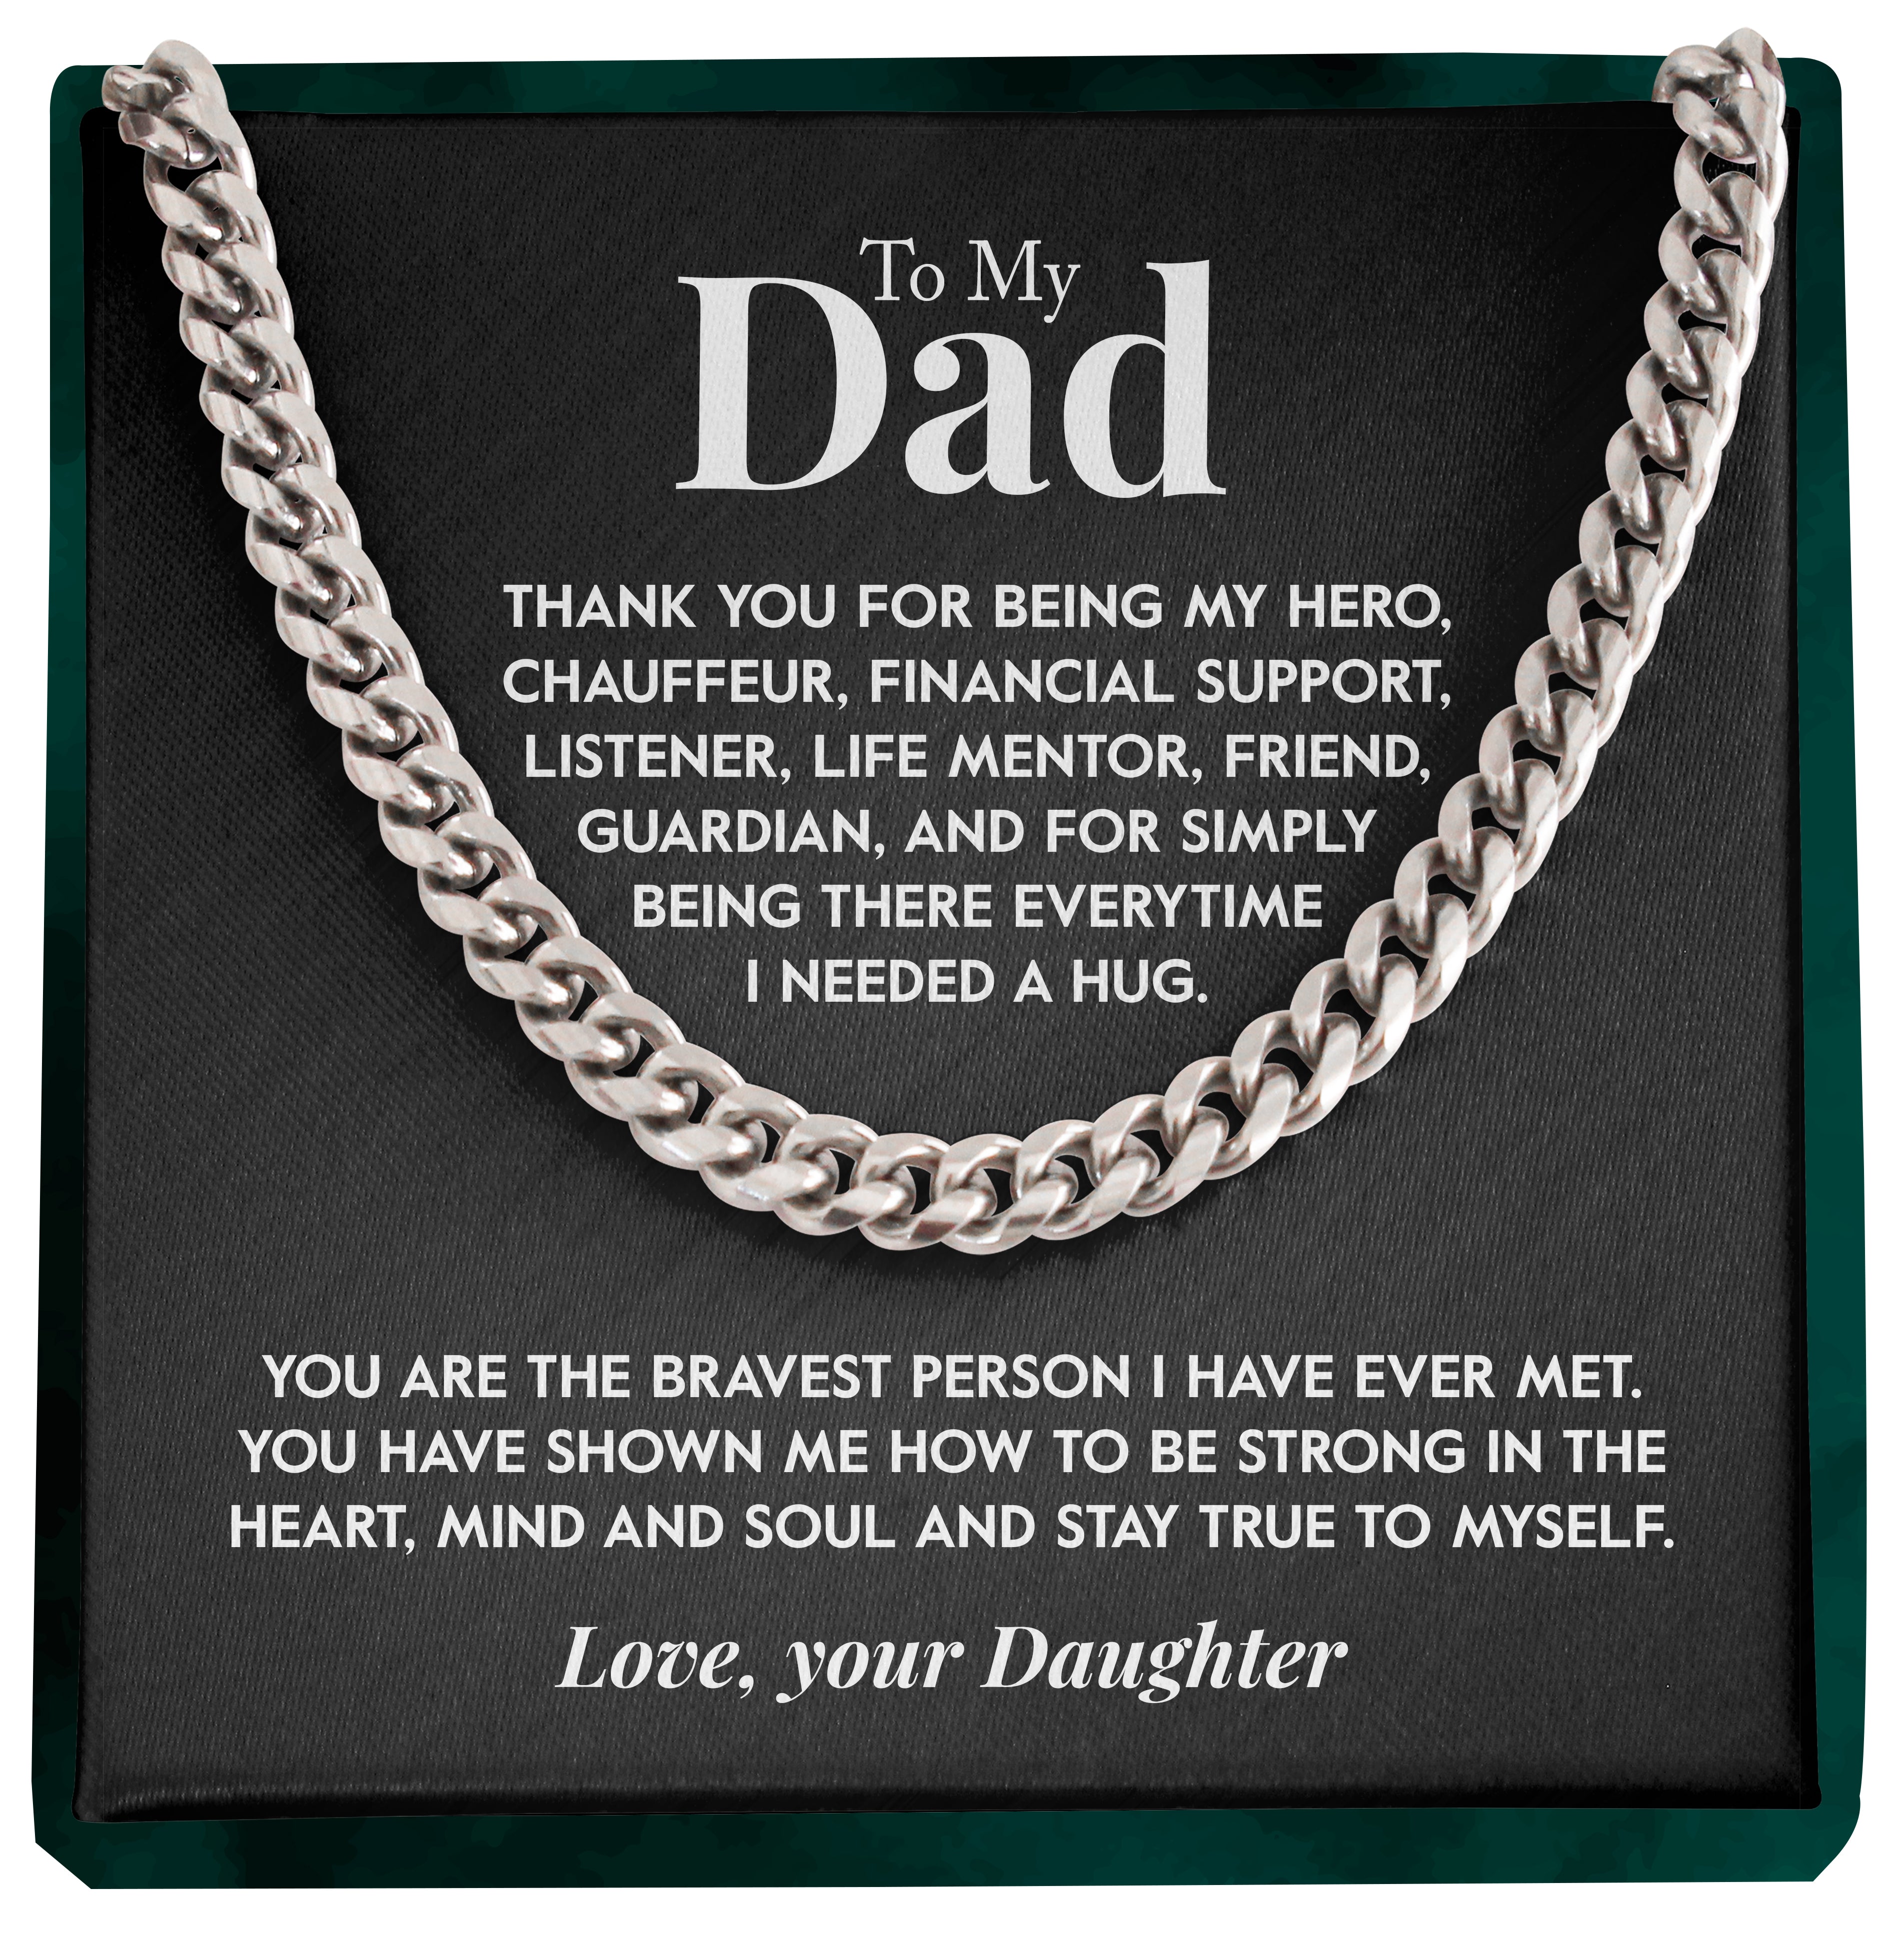 To My Dad | "The Bravest Person" | Cuban Chain Link